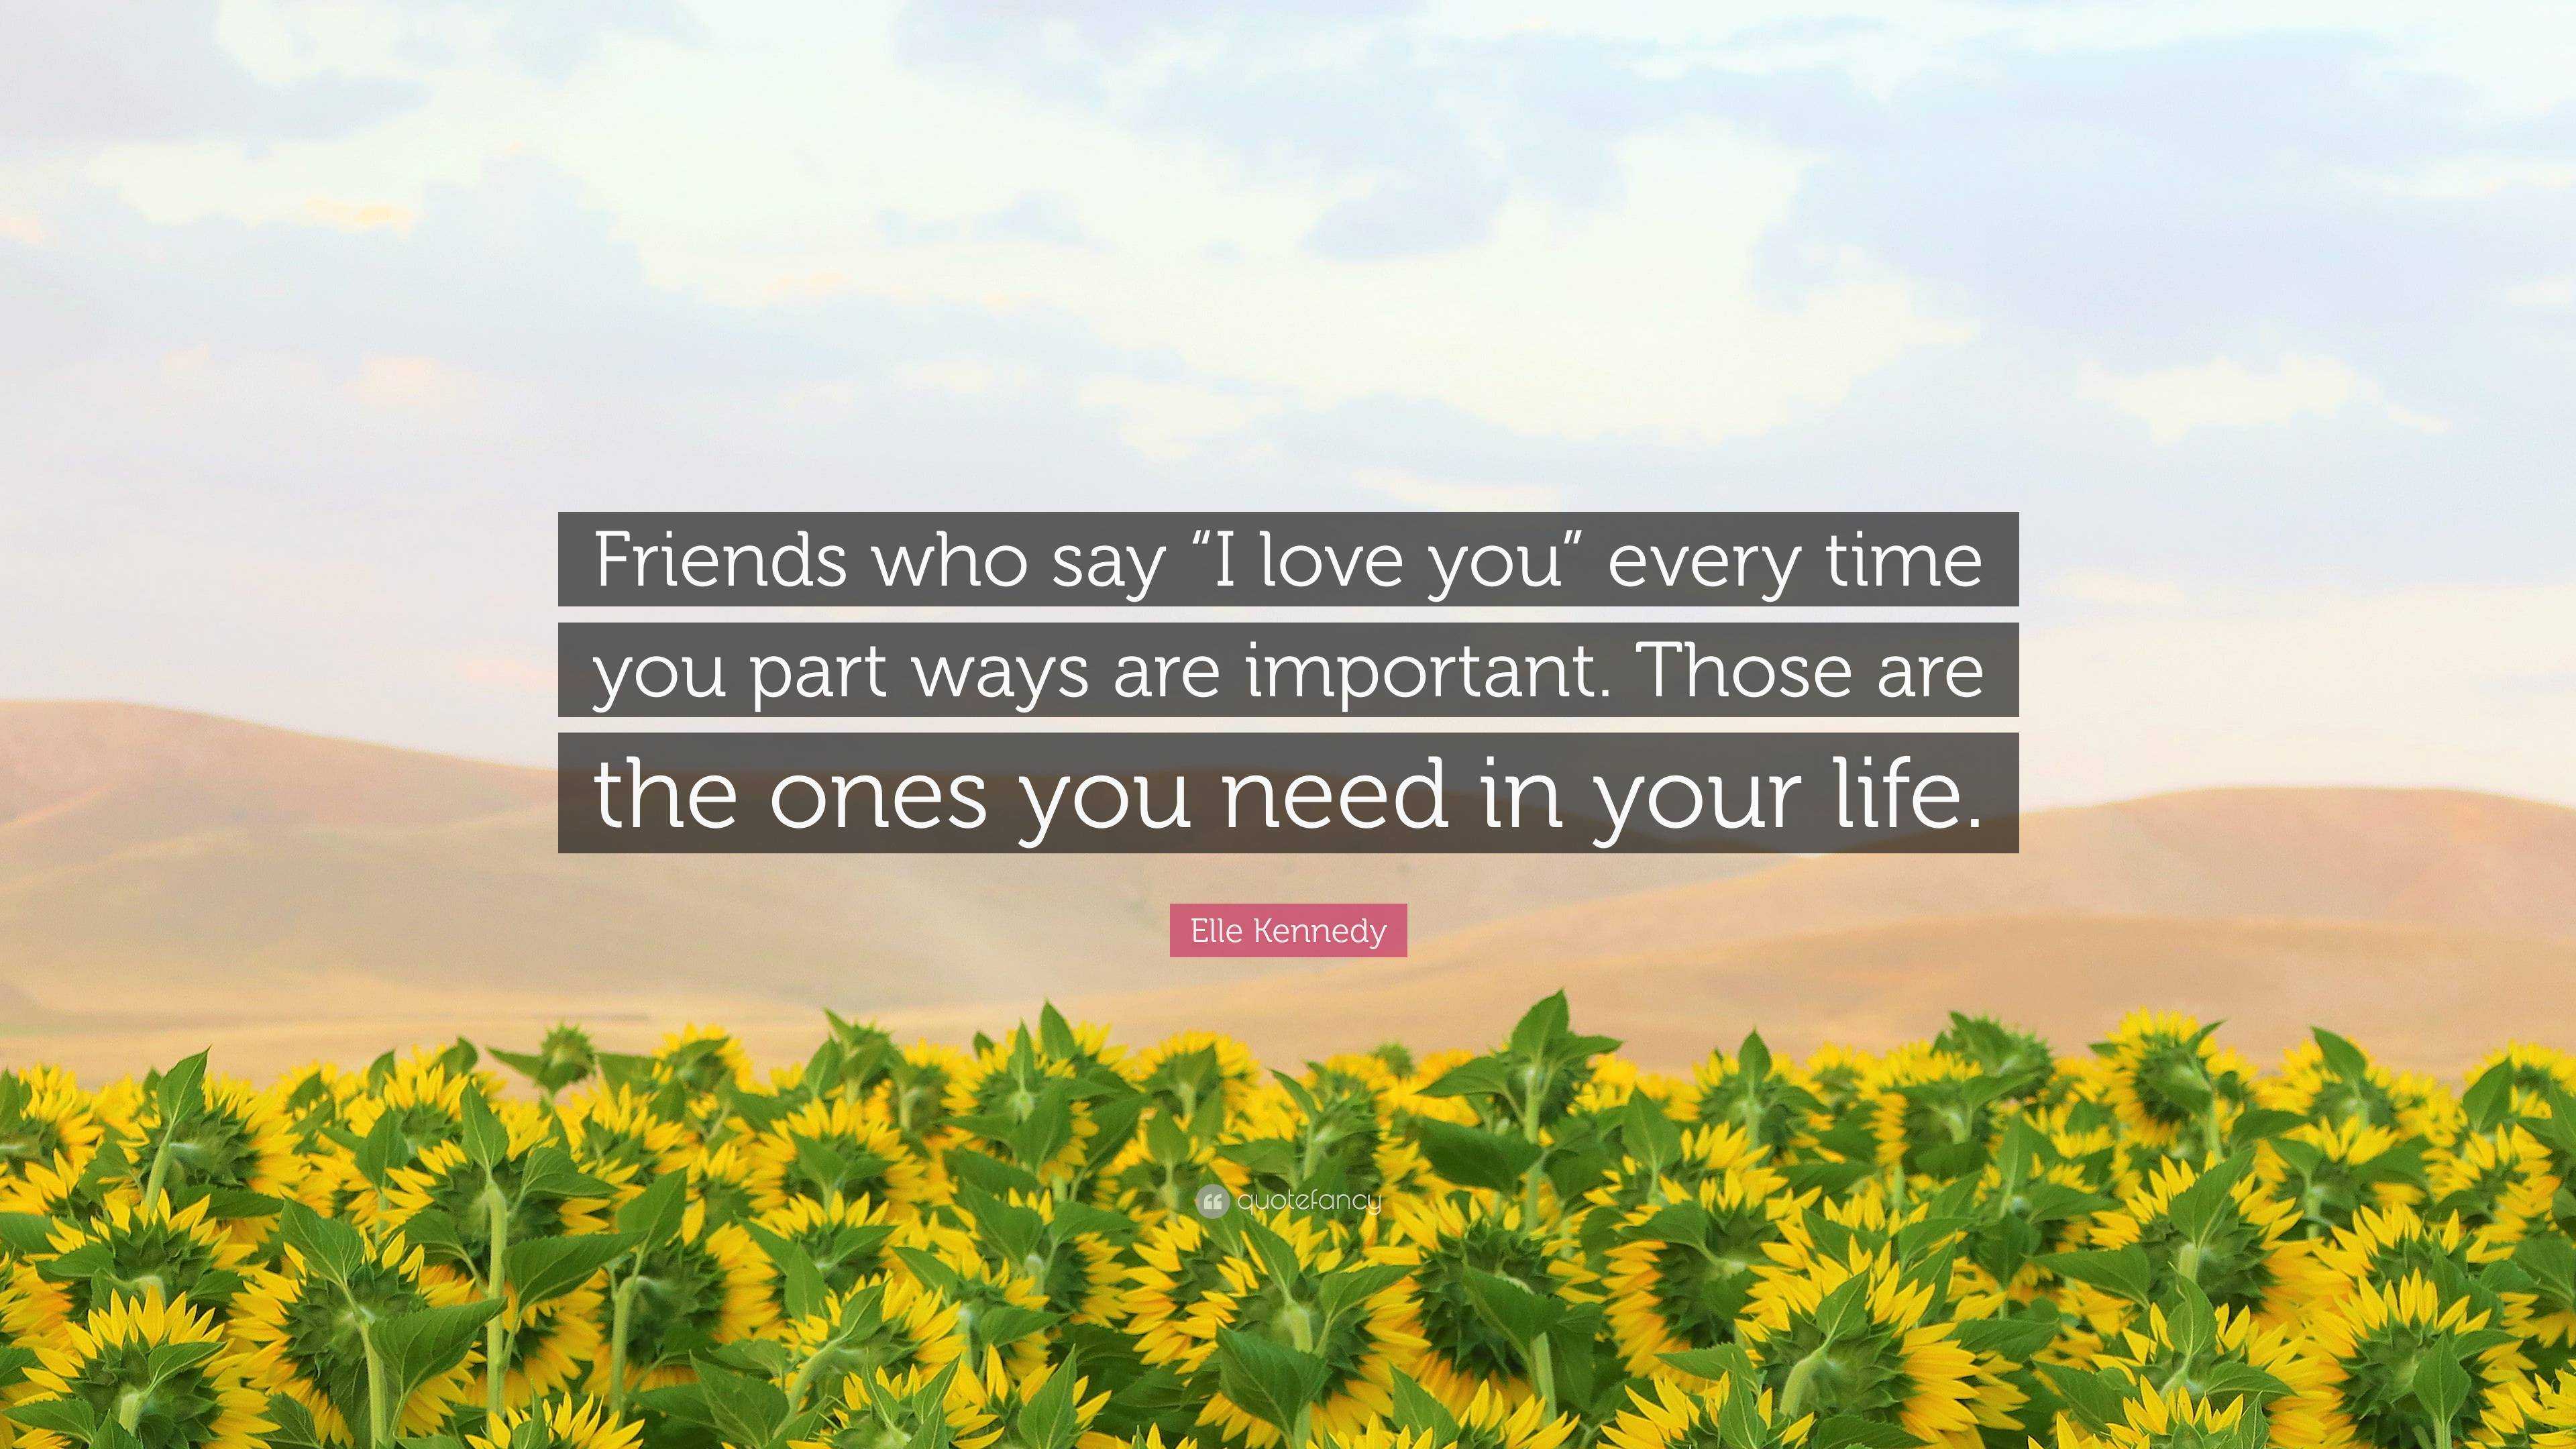 https://quotefancy.com/media/wallpaper/3840x2160/6426442-Elle-Kennedy-Quote-Friends-who-say-I-love-you-every-time-you-part.jpg